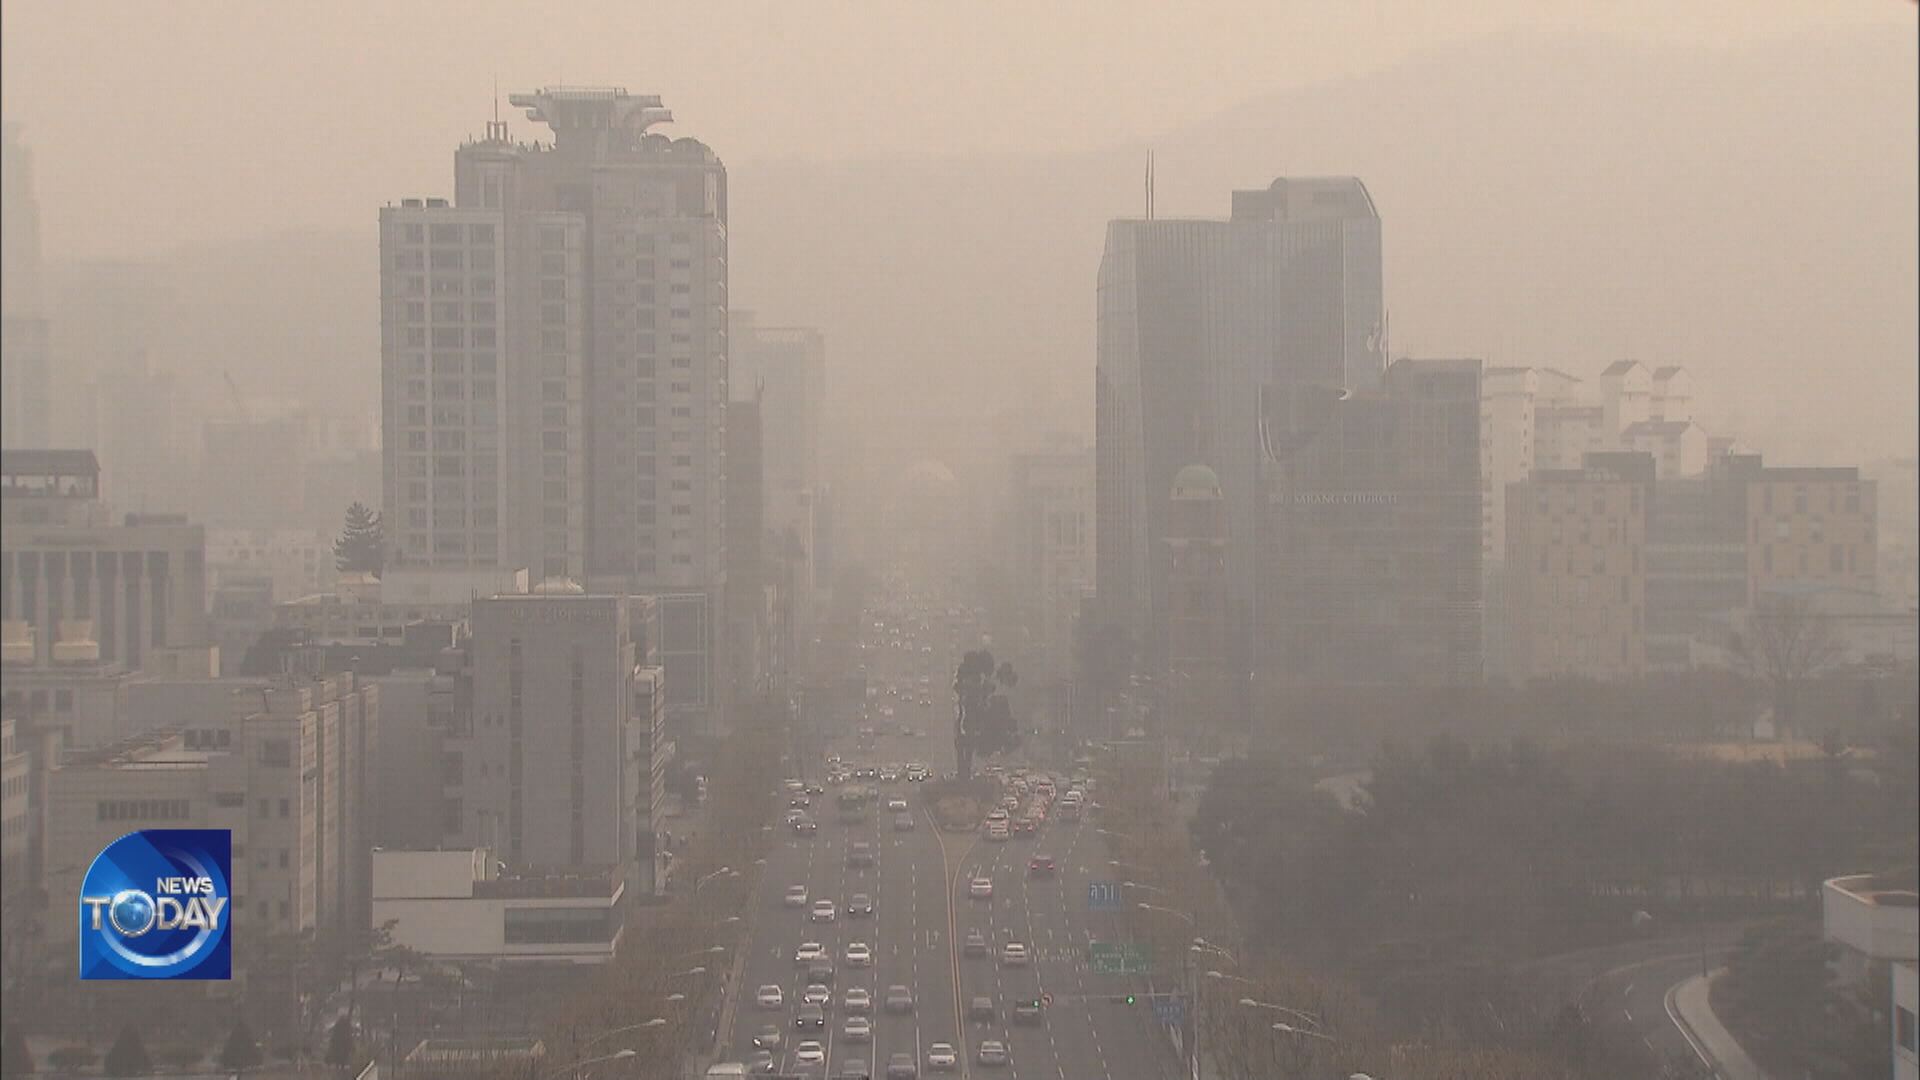 FINE DUST TAKES OVER NATION